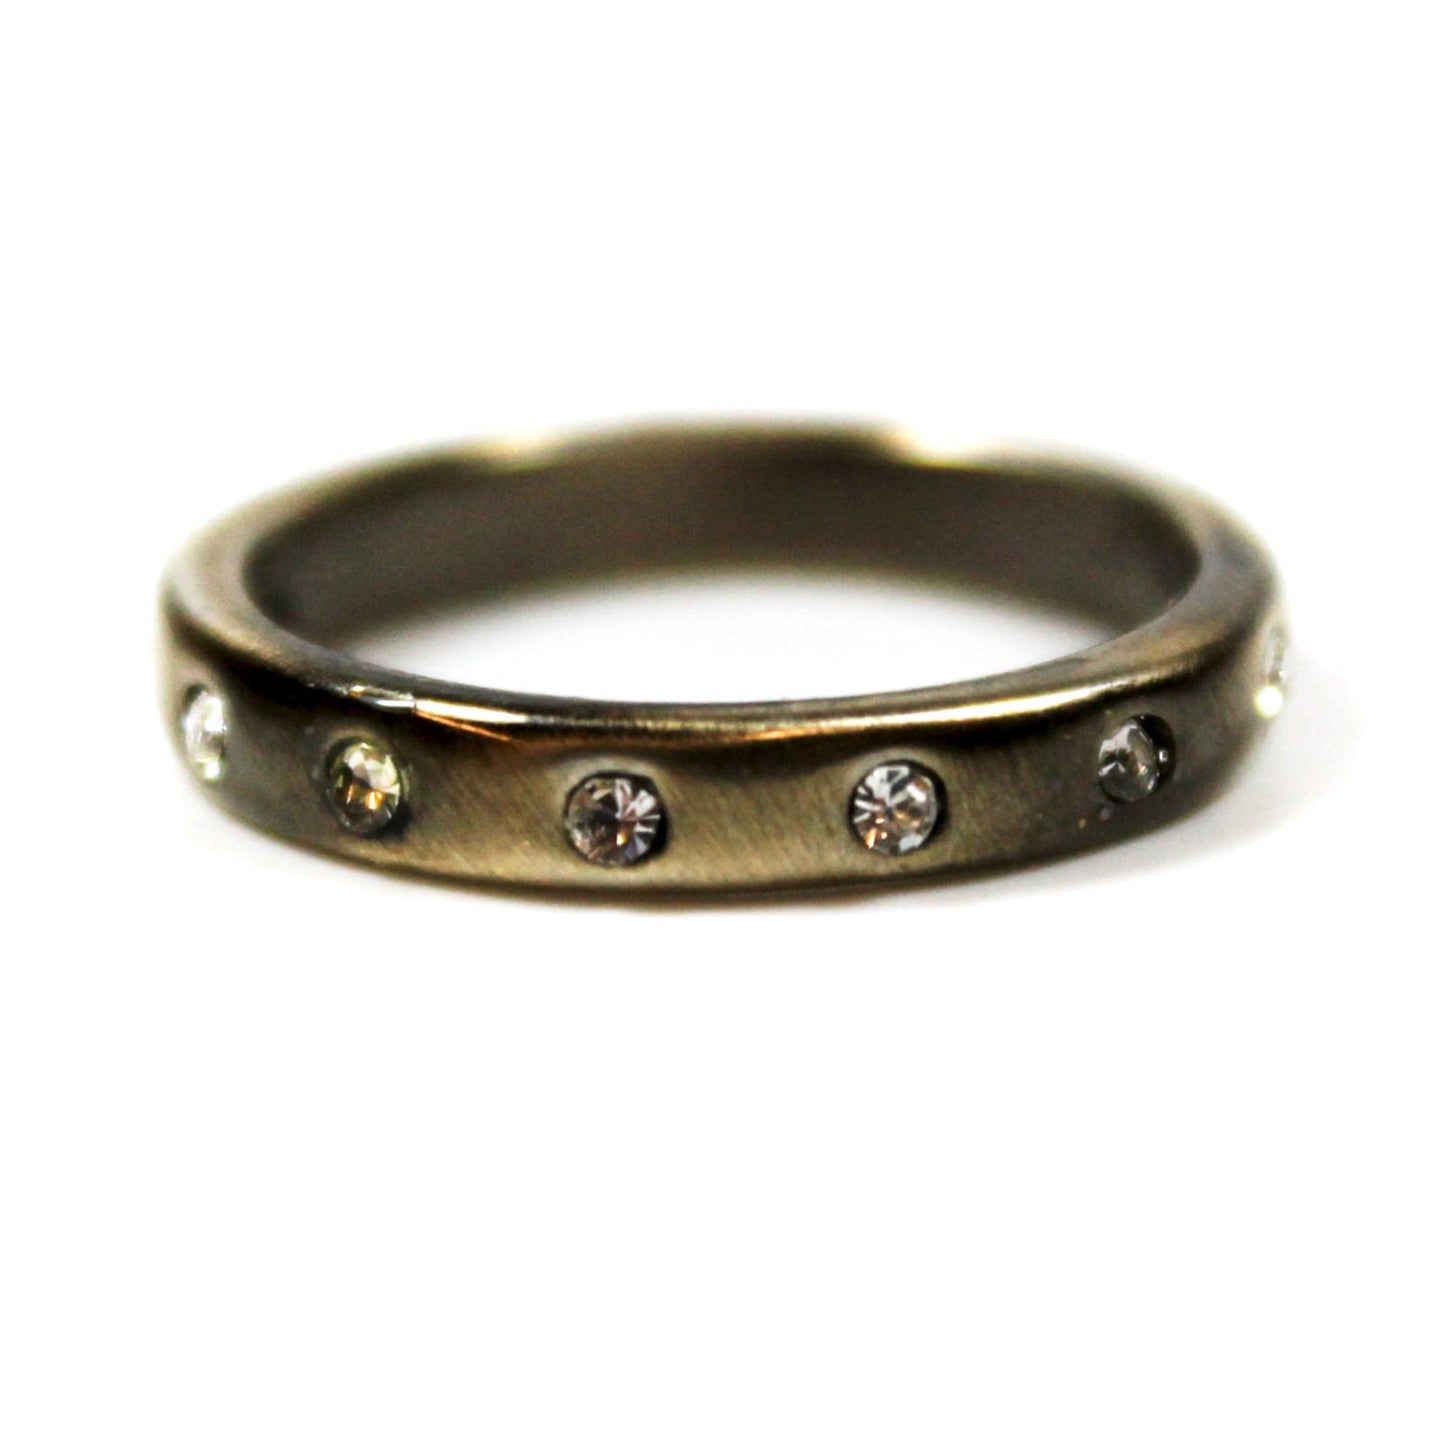 Vintage Ring 1980s Brushed Oxidized Gold Stacking Band Ring Swarovski Crystals #R3888 - Limited Stock - Never Worn